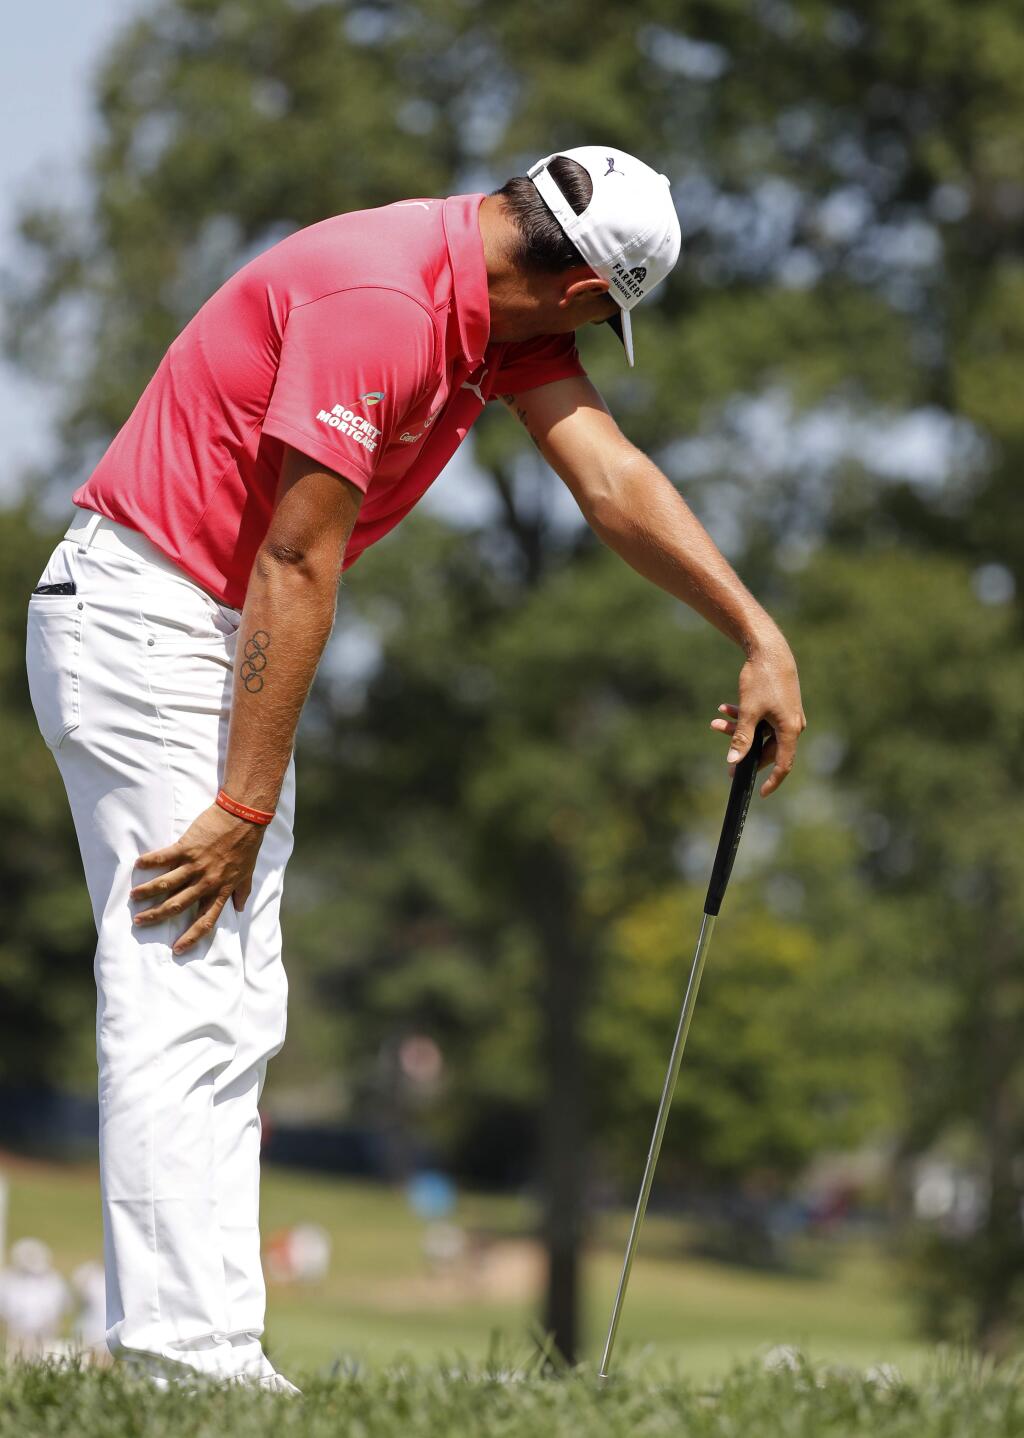 Rickie Fowler reacts to a missed putt on the seventh hole during the third round of the PGA Championship golf tournament at Bellerive Country Club, Saturday, Aug. 11, 2018, in St. Louis. (AP Photo/Brynn Anderson)